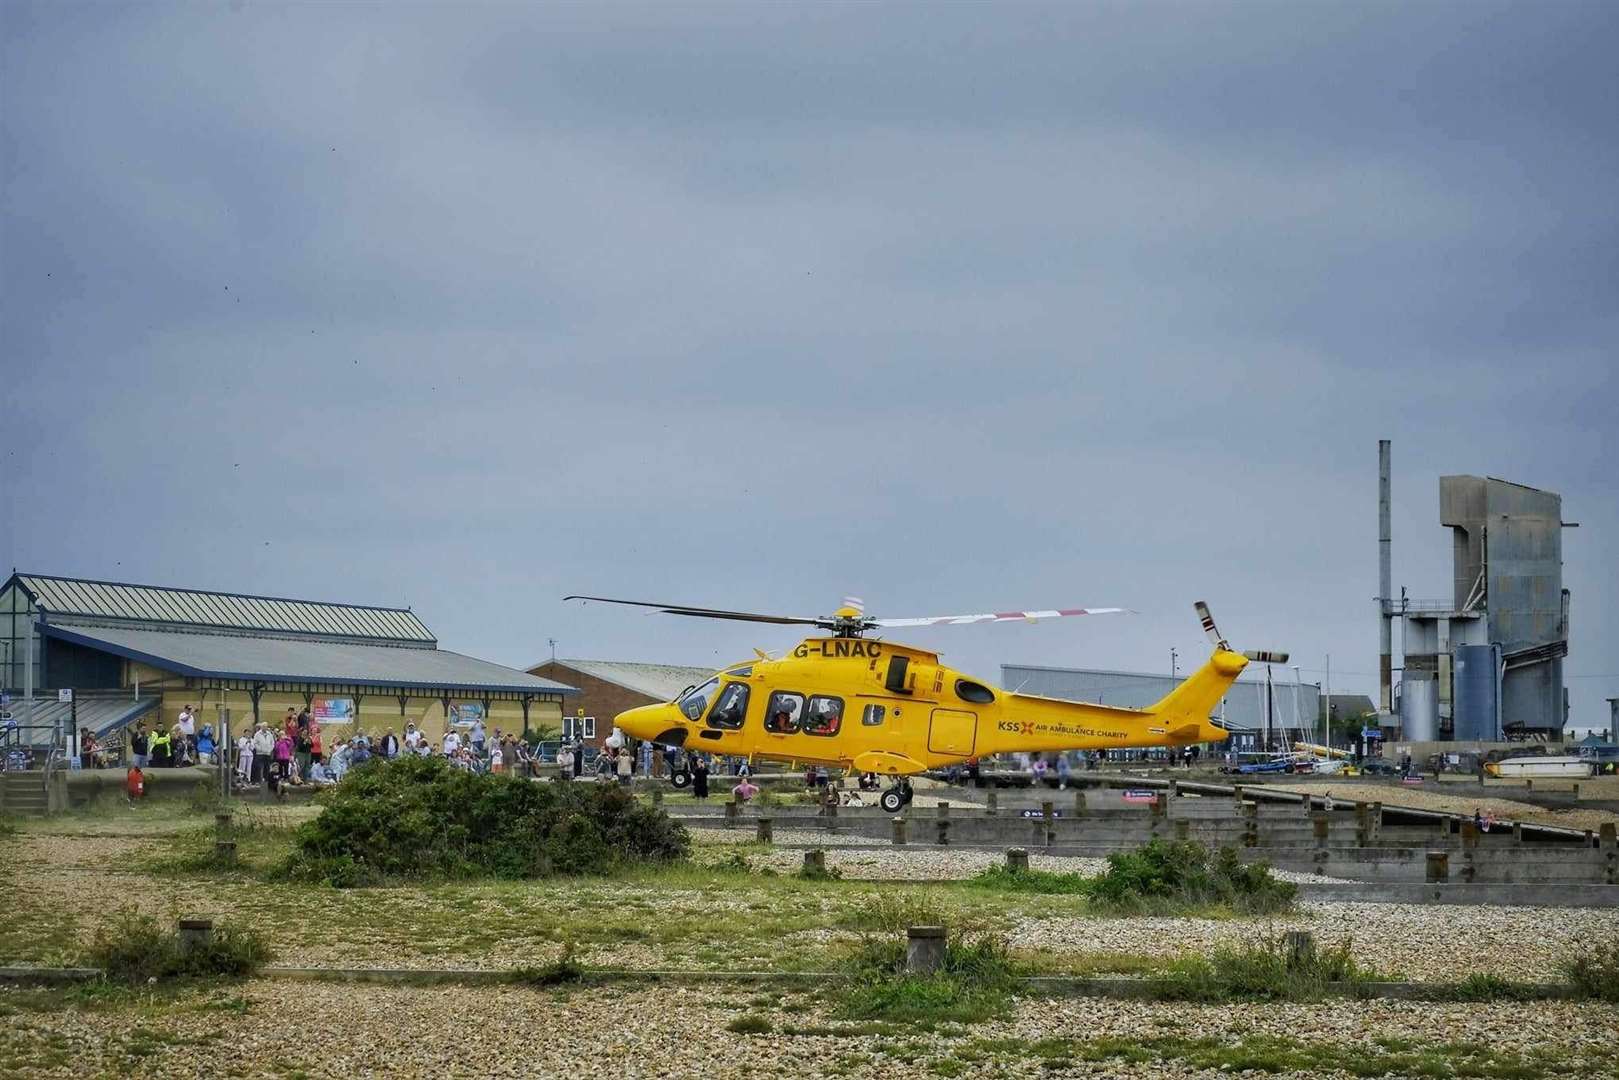 The air ambulance landed nearby after the collision. Picture: Tom Banbury